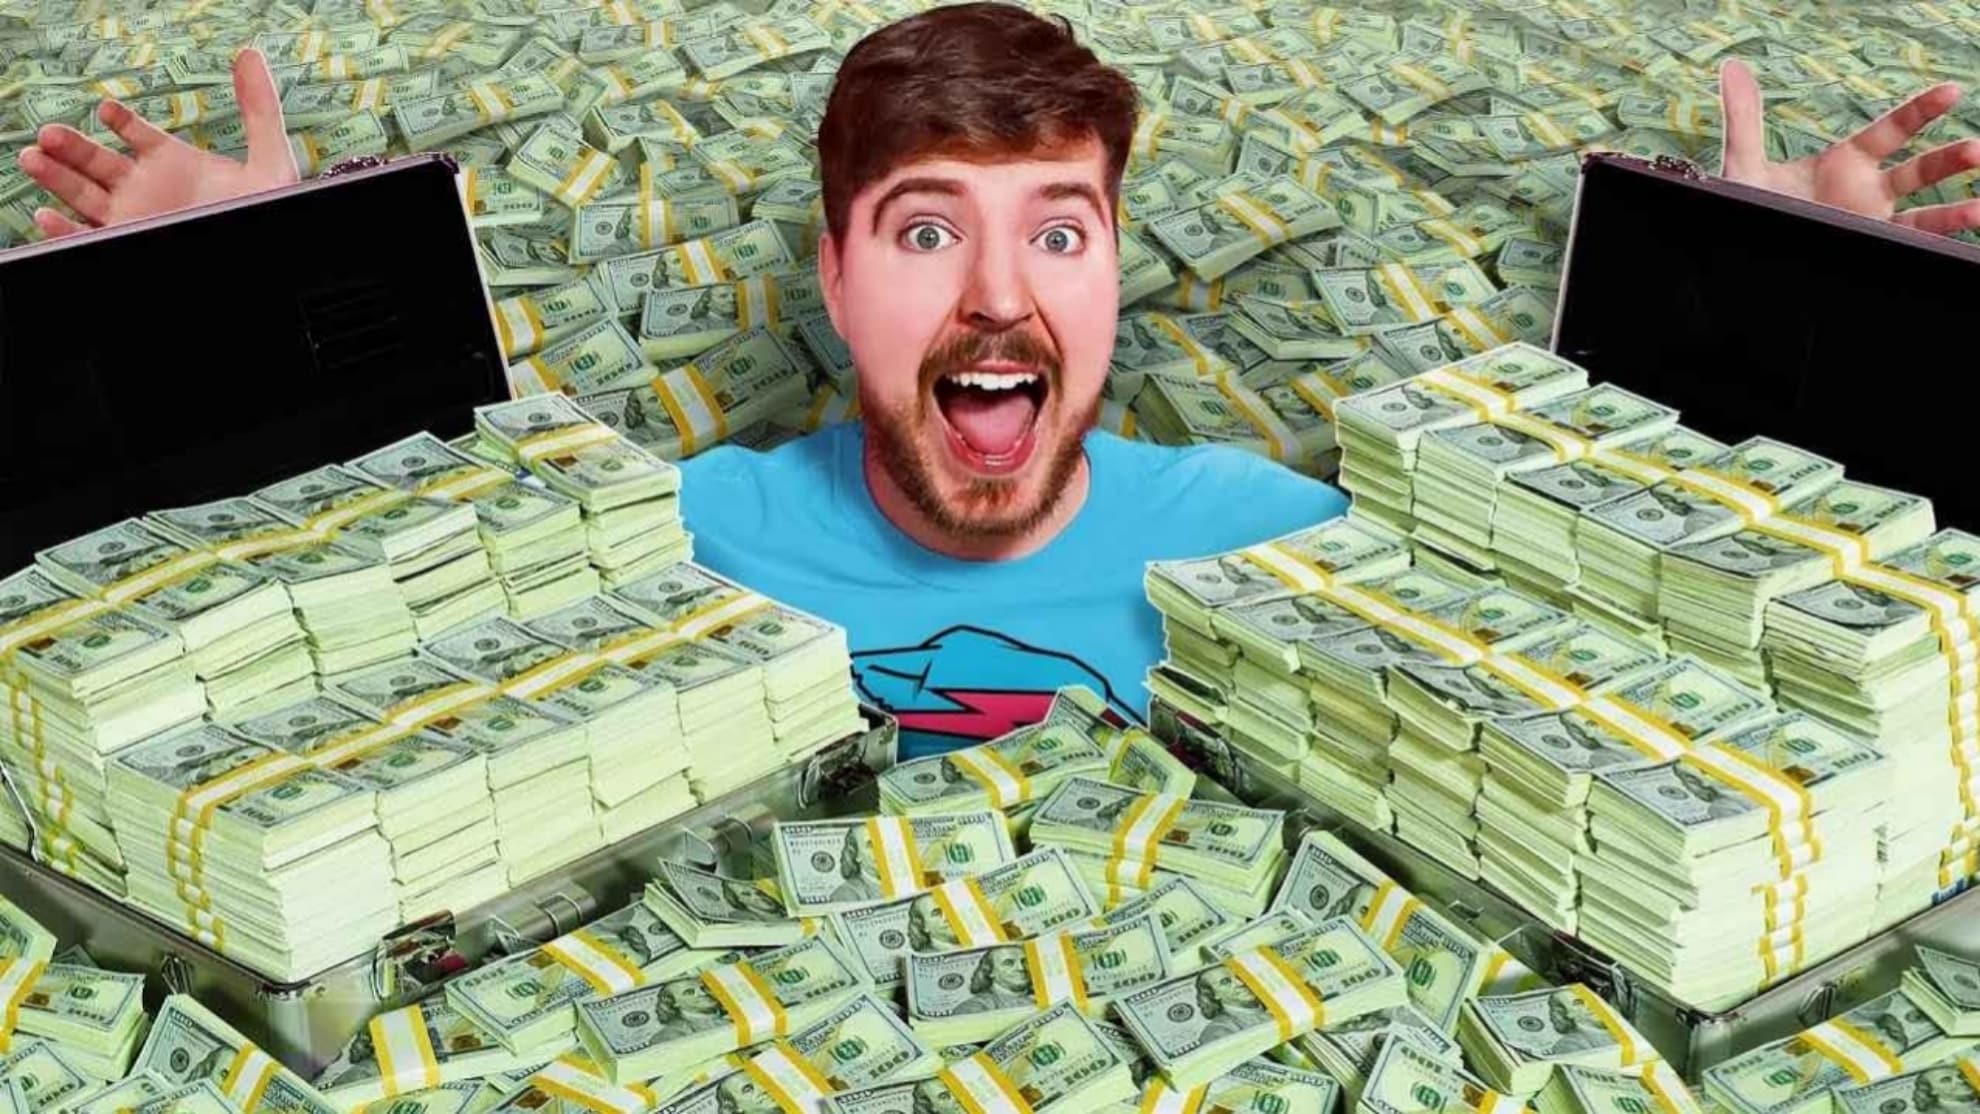 Ghana Welcomes Mr. Beast: All You Need to Know